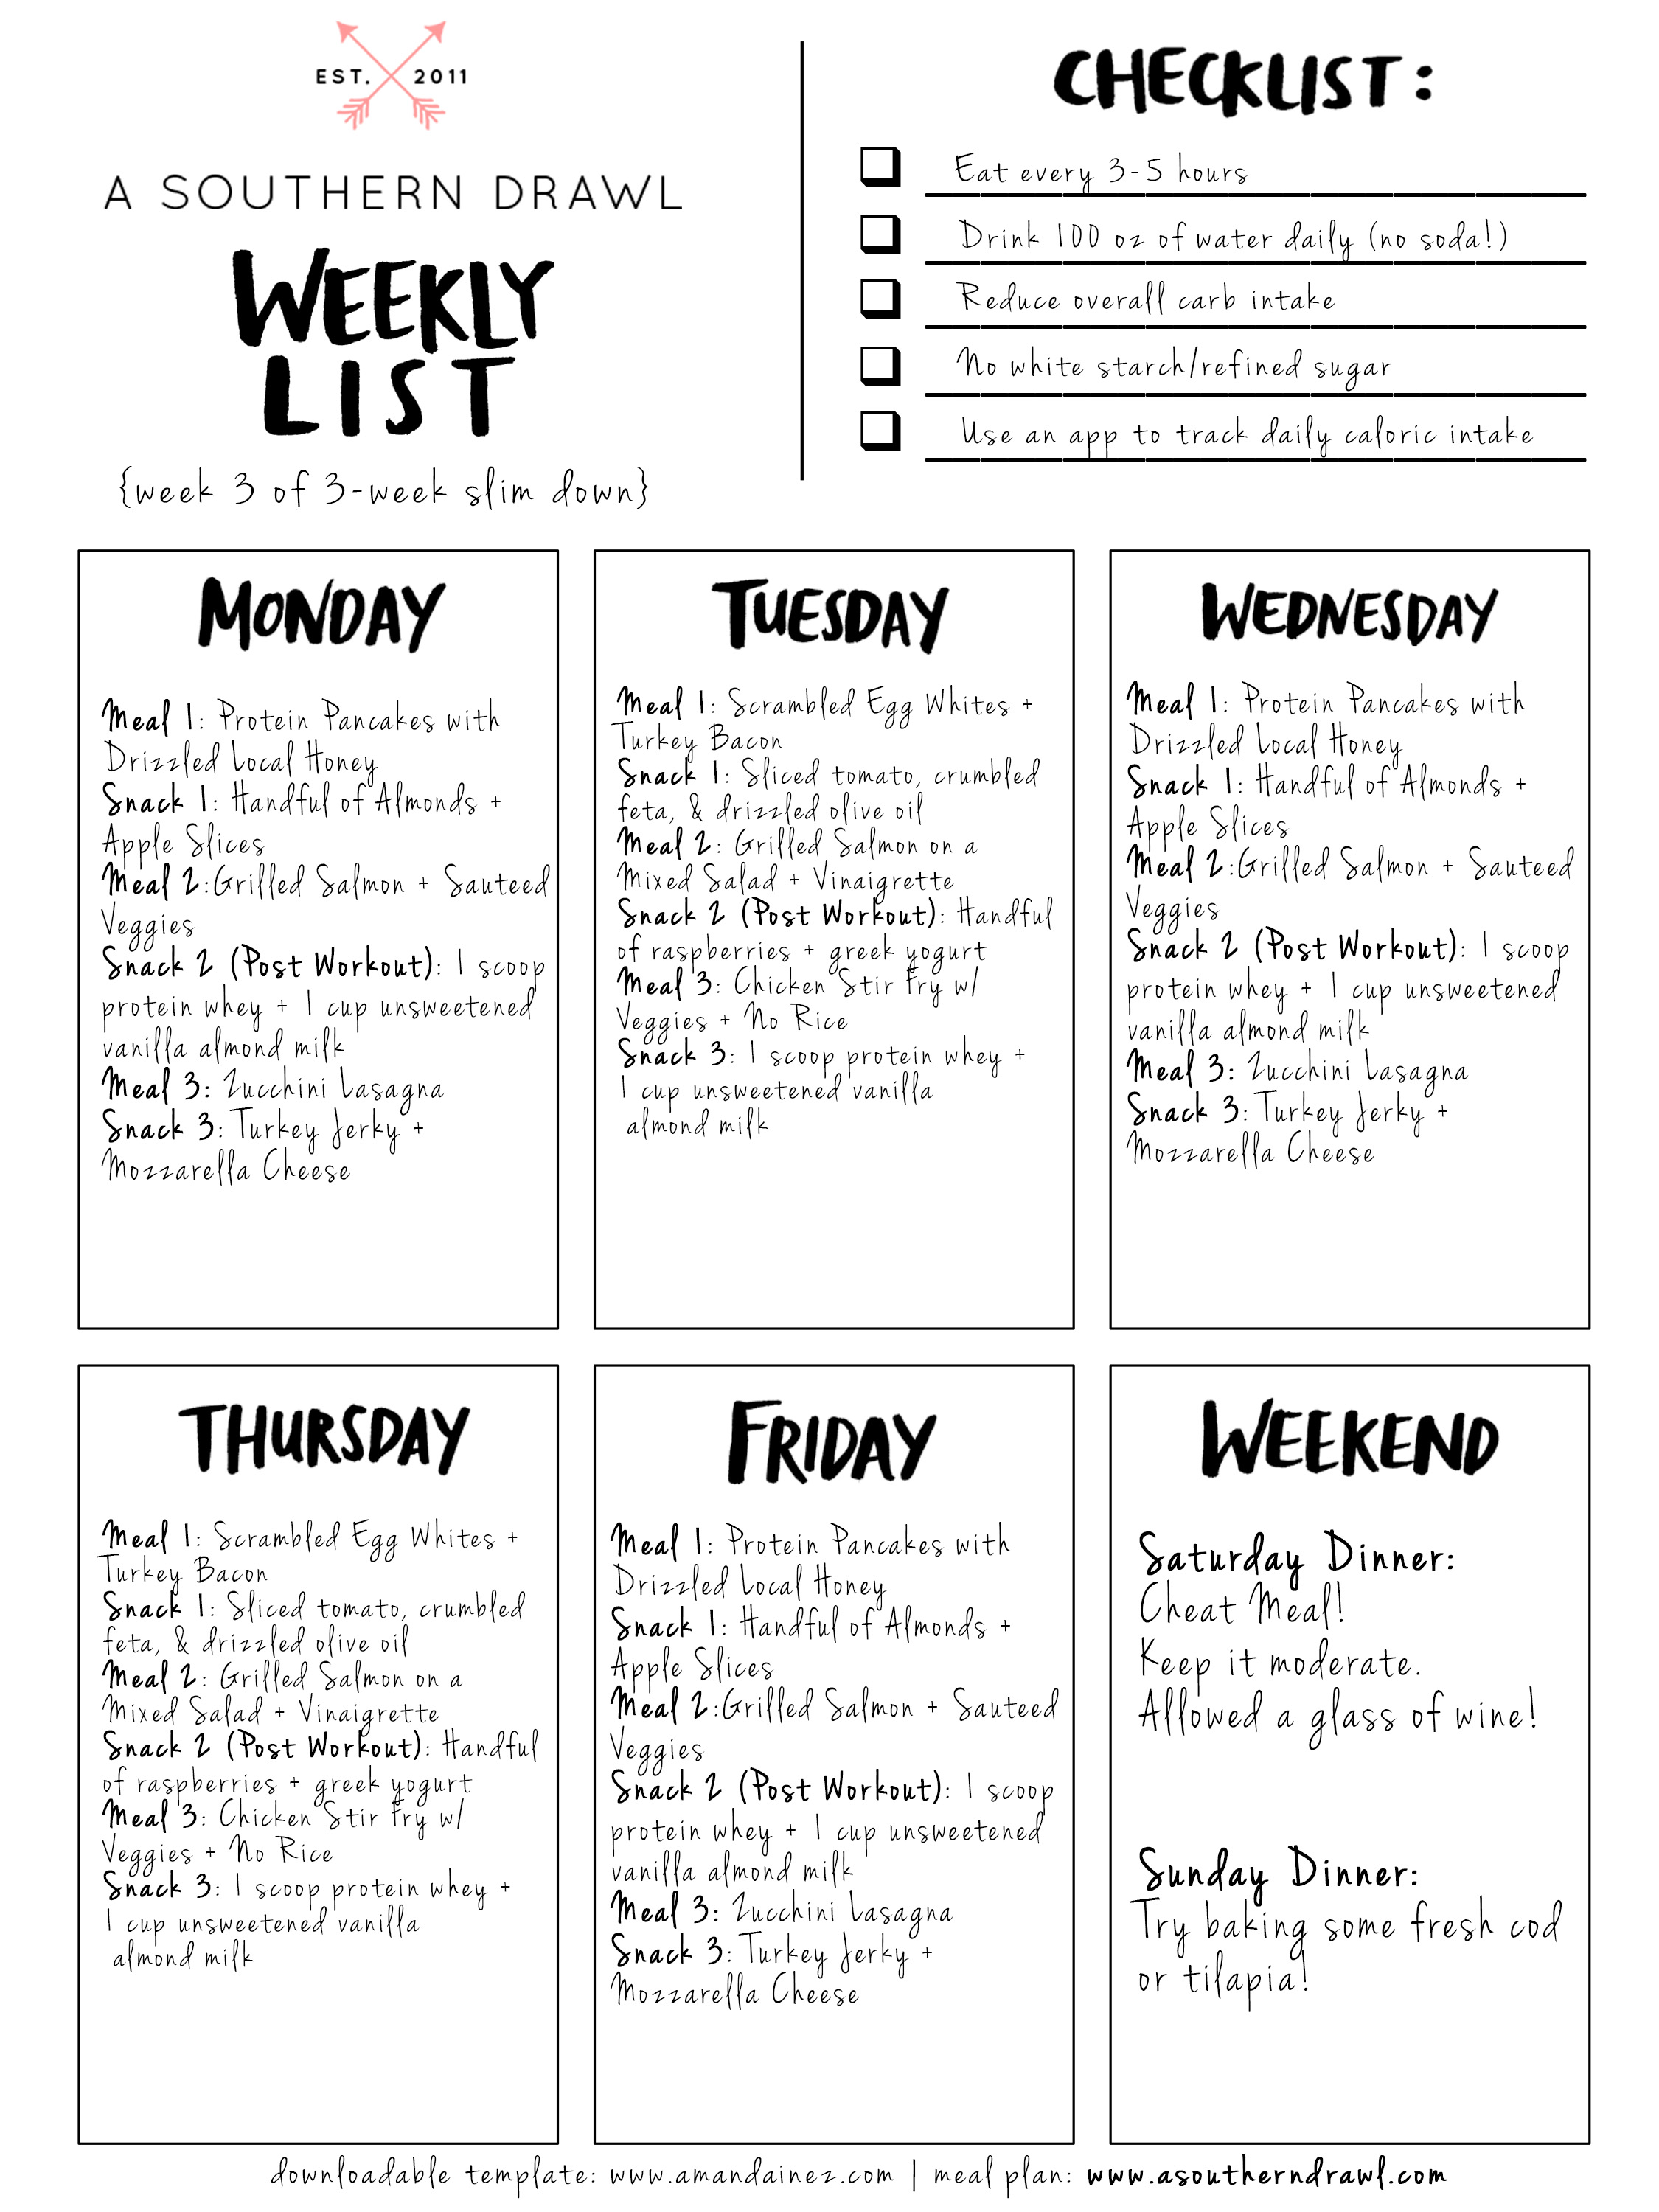 3 week clean eating plan, three week slim down guide, 3 week slim down guide, weekly workout routine, weekly meal prep ideas, activewear, alo moto leggings, athleisure outfit, athleisure fashion, fitness, fitspo, three week diet plan, 21 day diet, 21 day slim down, 21 day meal prep, fitness blogger, kentucky fashion blogger // grace wainwright a southern drawl